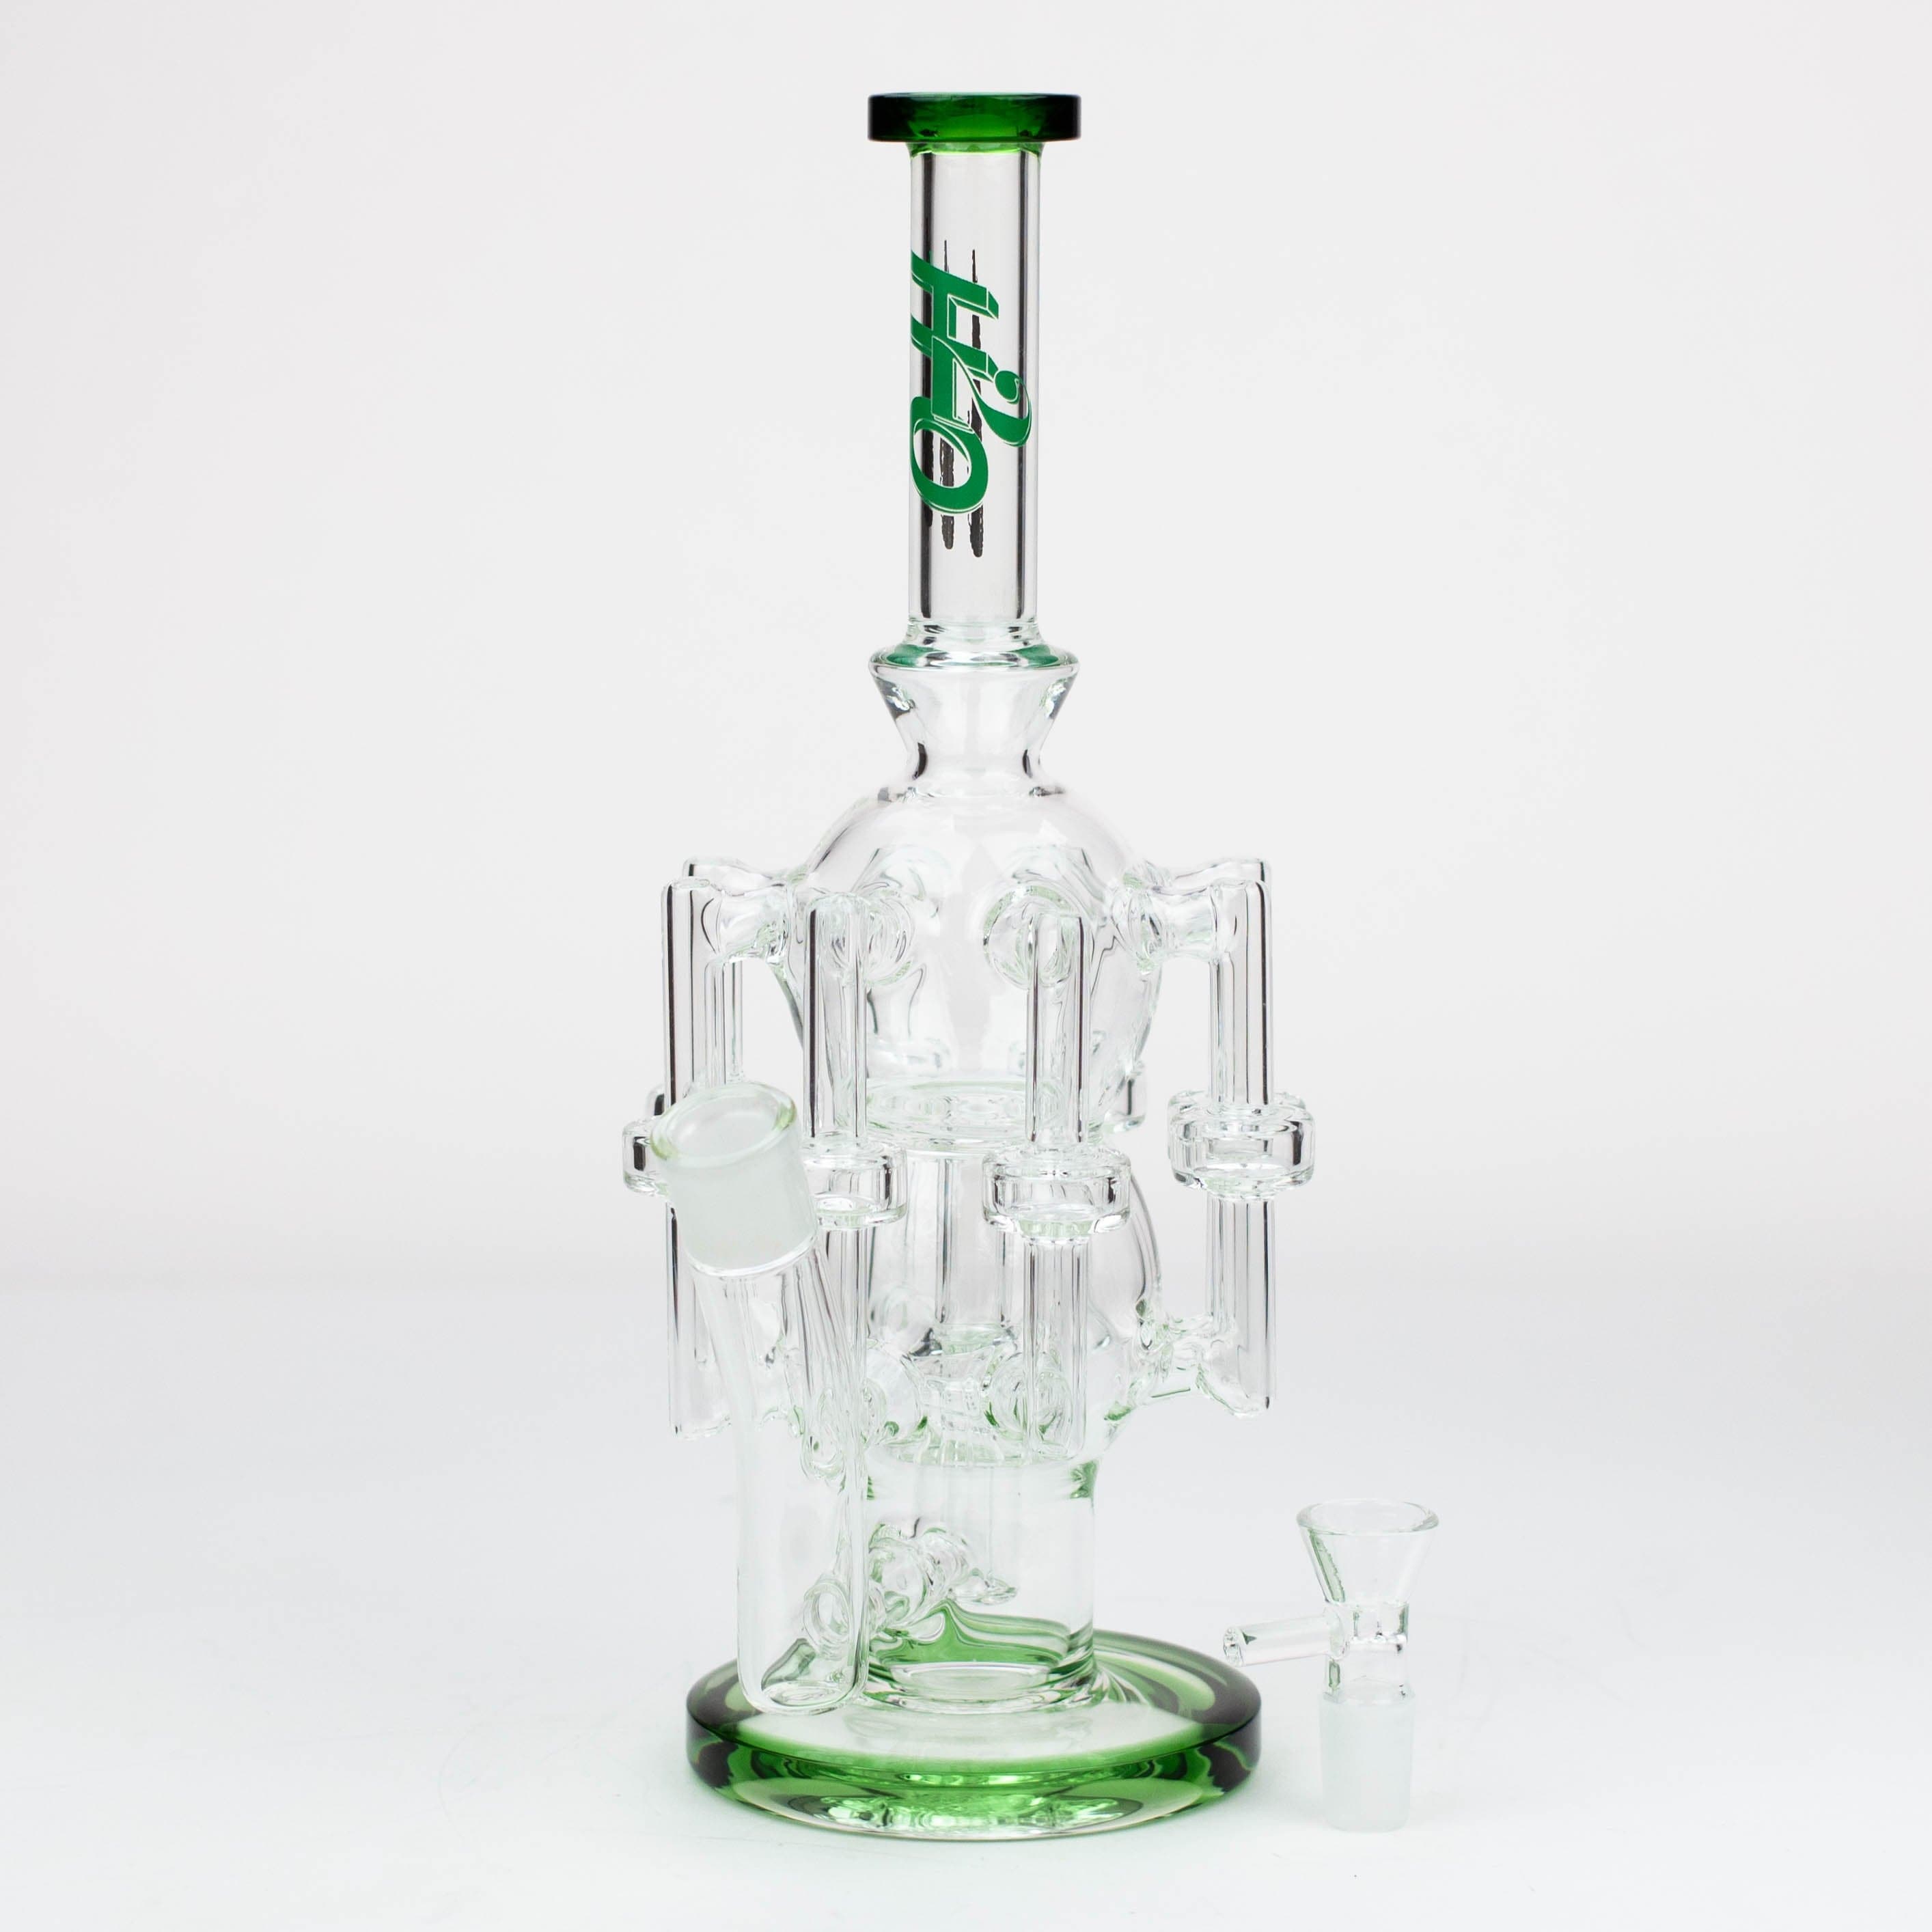 H2O Glass water recycle pipes 13.5"_8